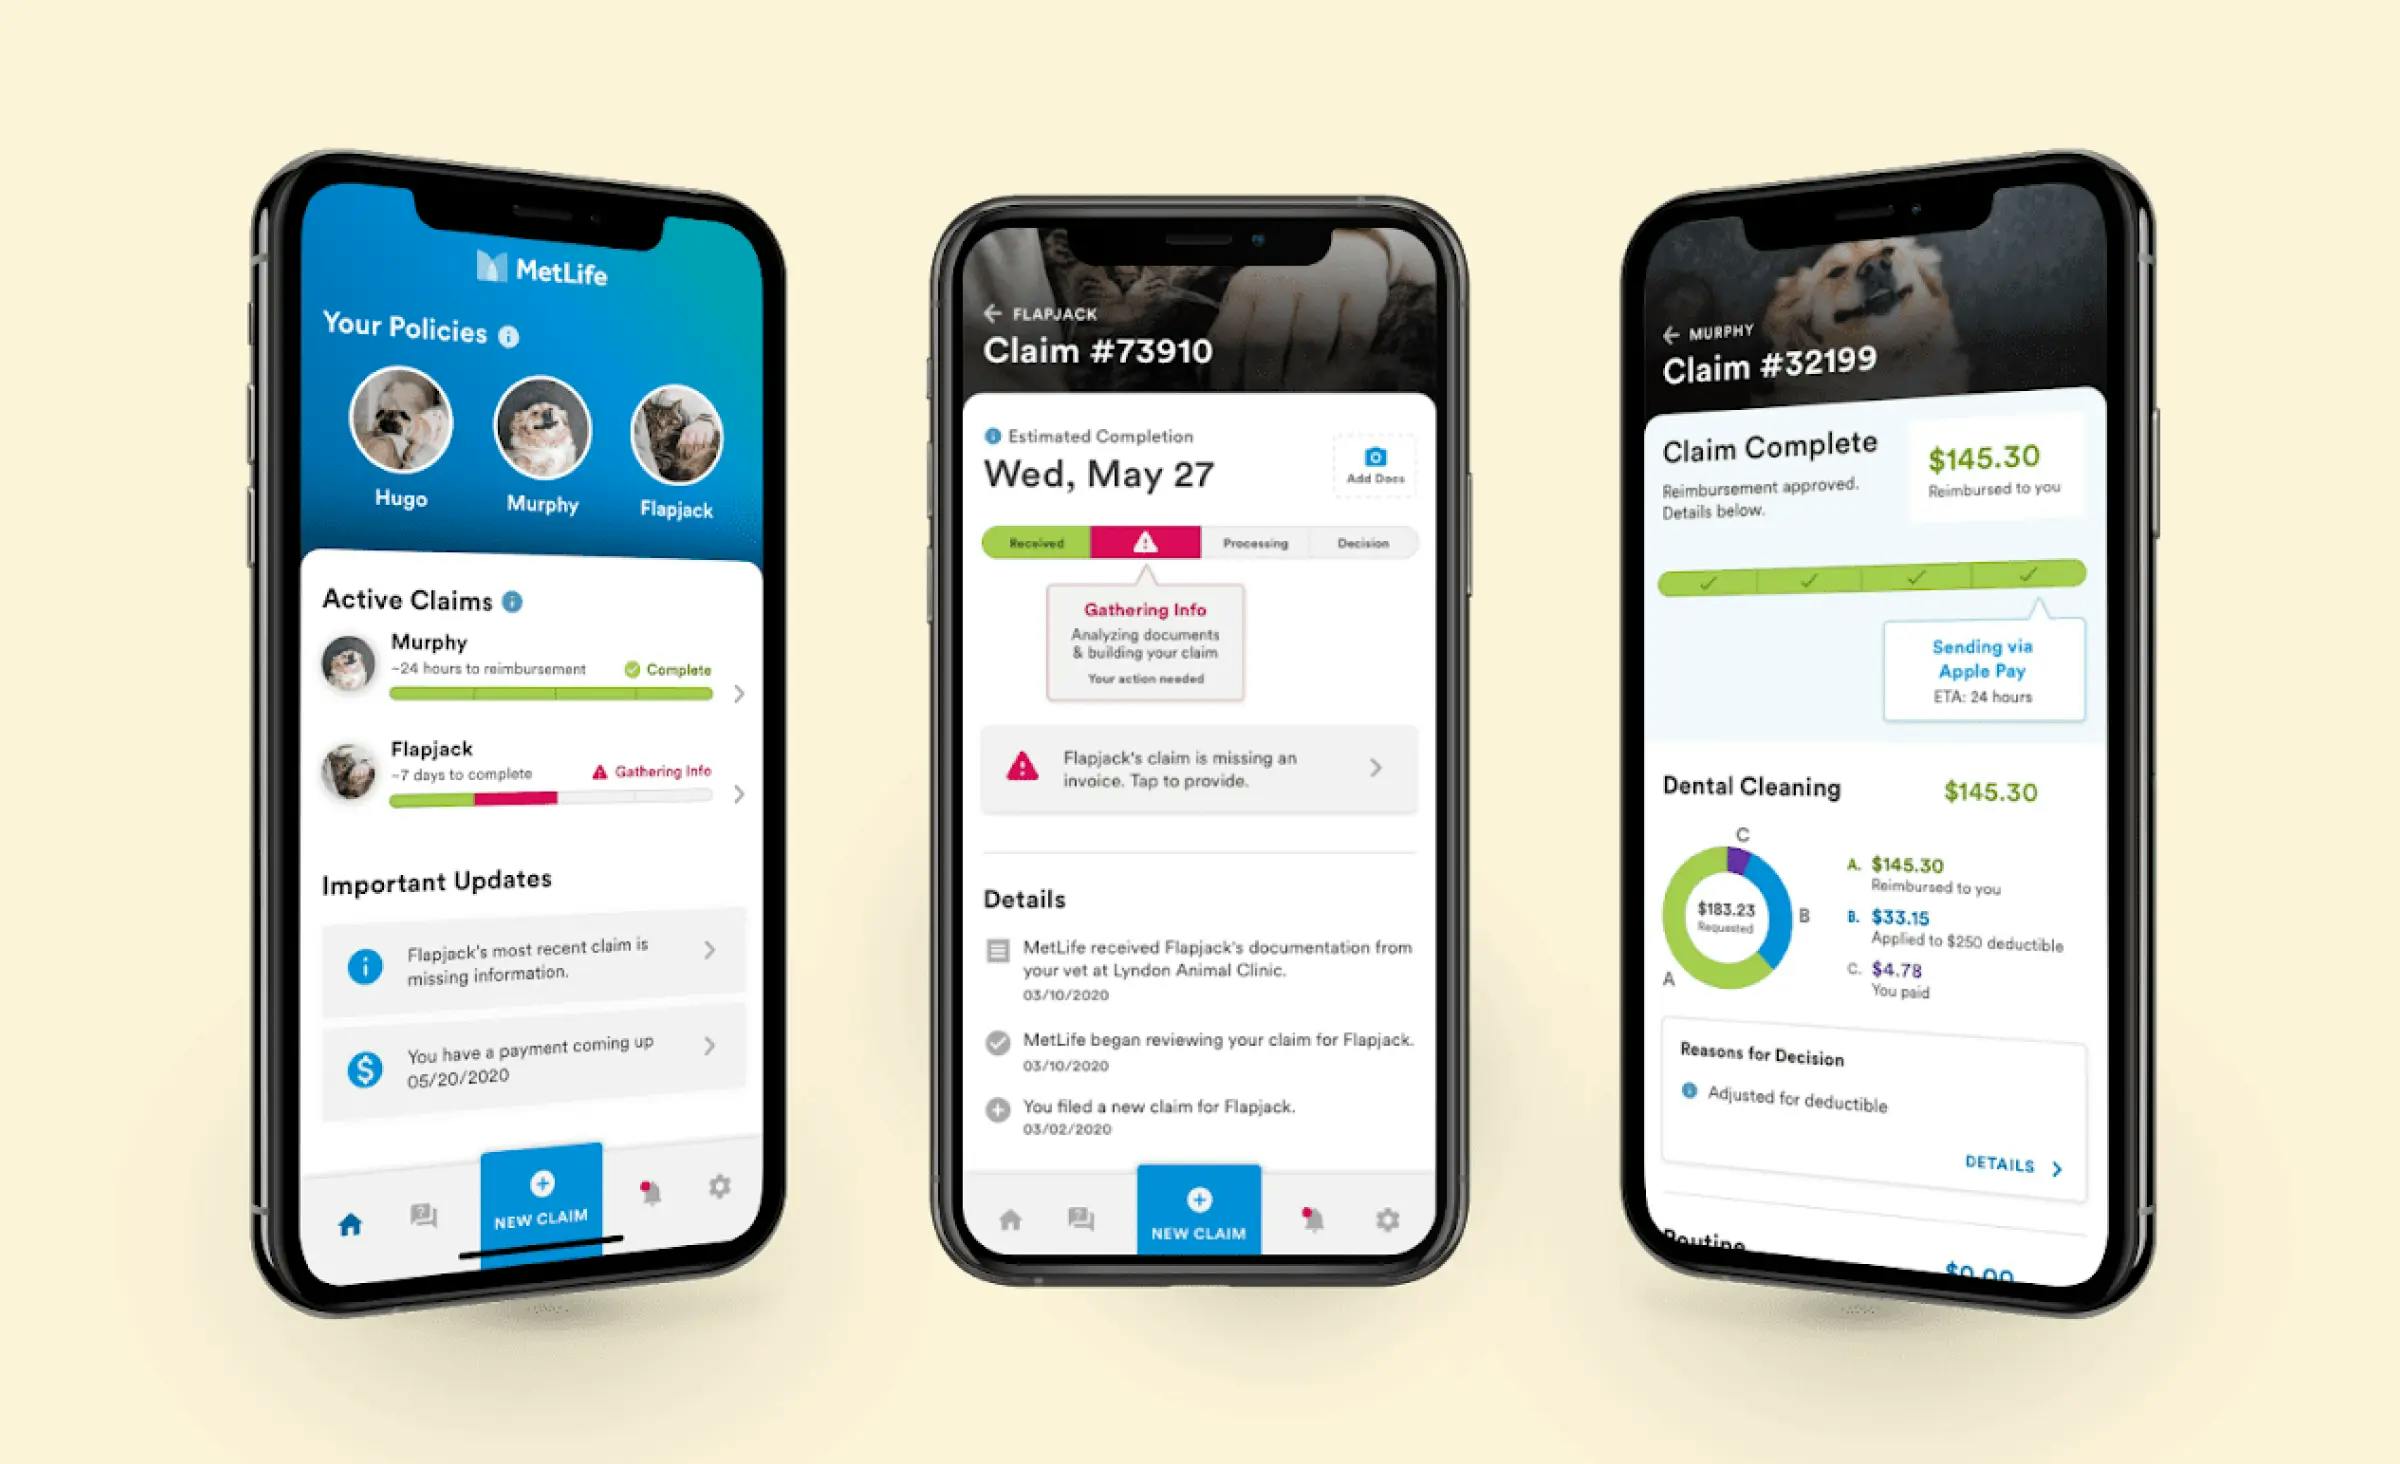 Three screens of the MetLife pet insurance mobile app. The first screen displays policies, covered pets, active claims, and important updates. The second screen shows claim details, a progress bar, and claim-related notifications. For example, the progress bar indicates a claim has been received but is missing information, and a notification reads "Flapjack's claim is missing an invoice. Tap to provide." The third screen displays a completed claim with details on dental cleaning expenses.